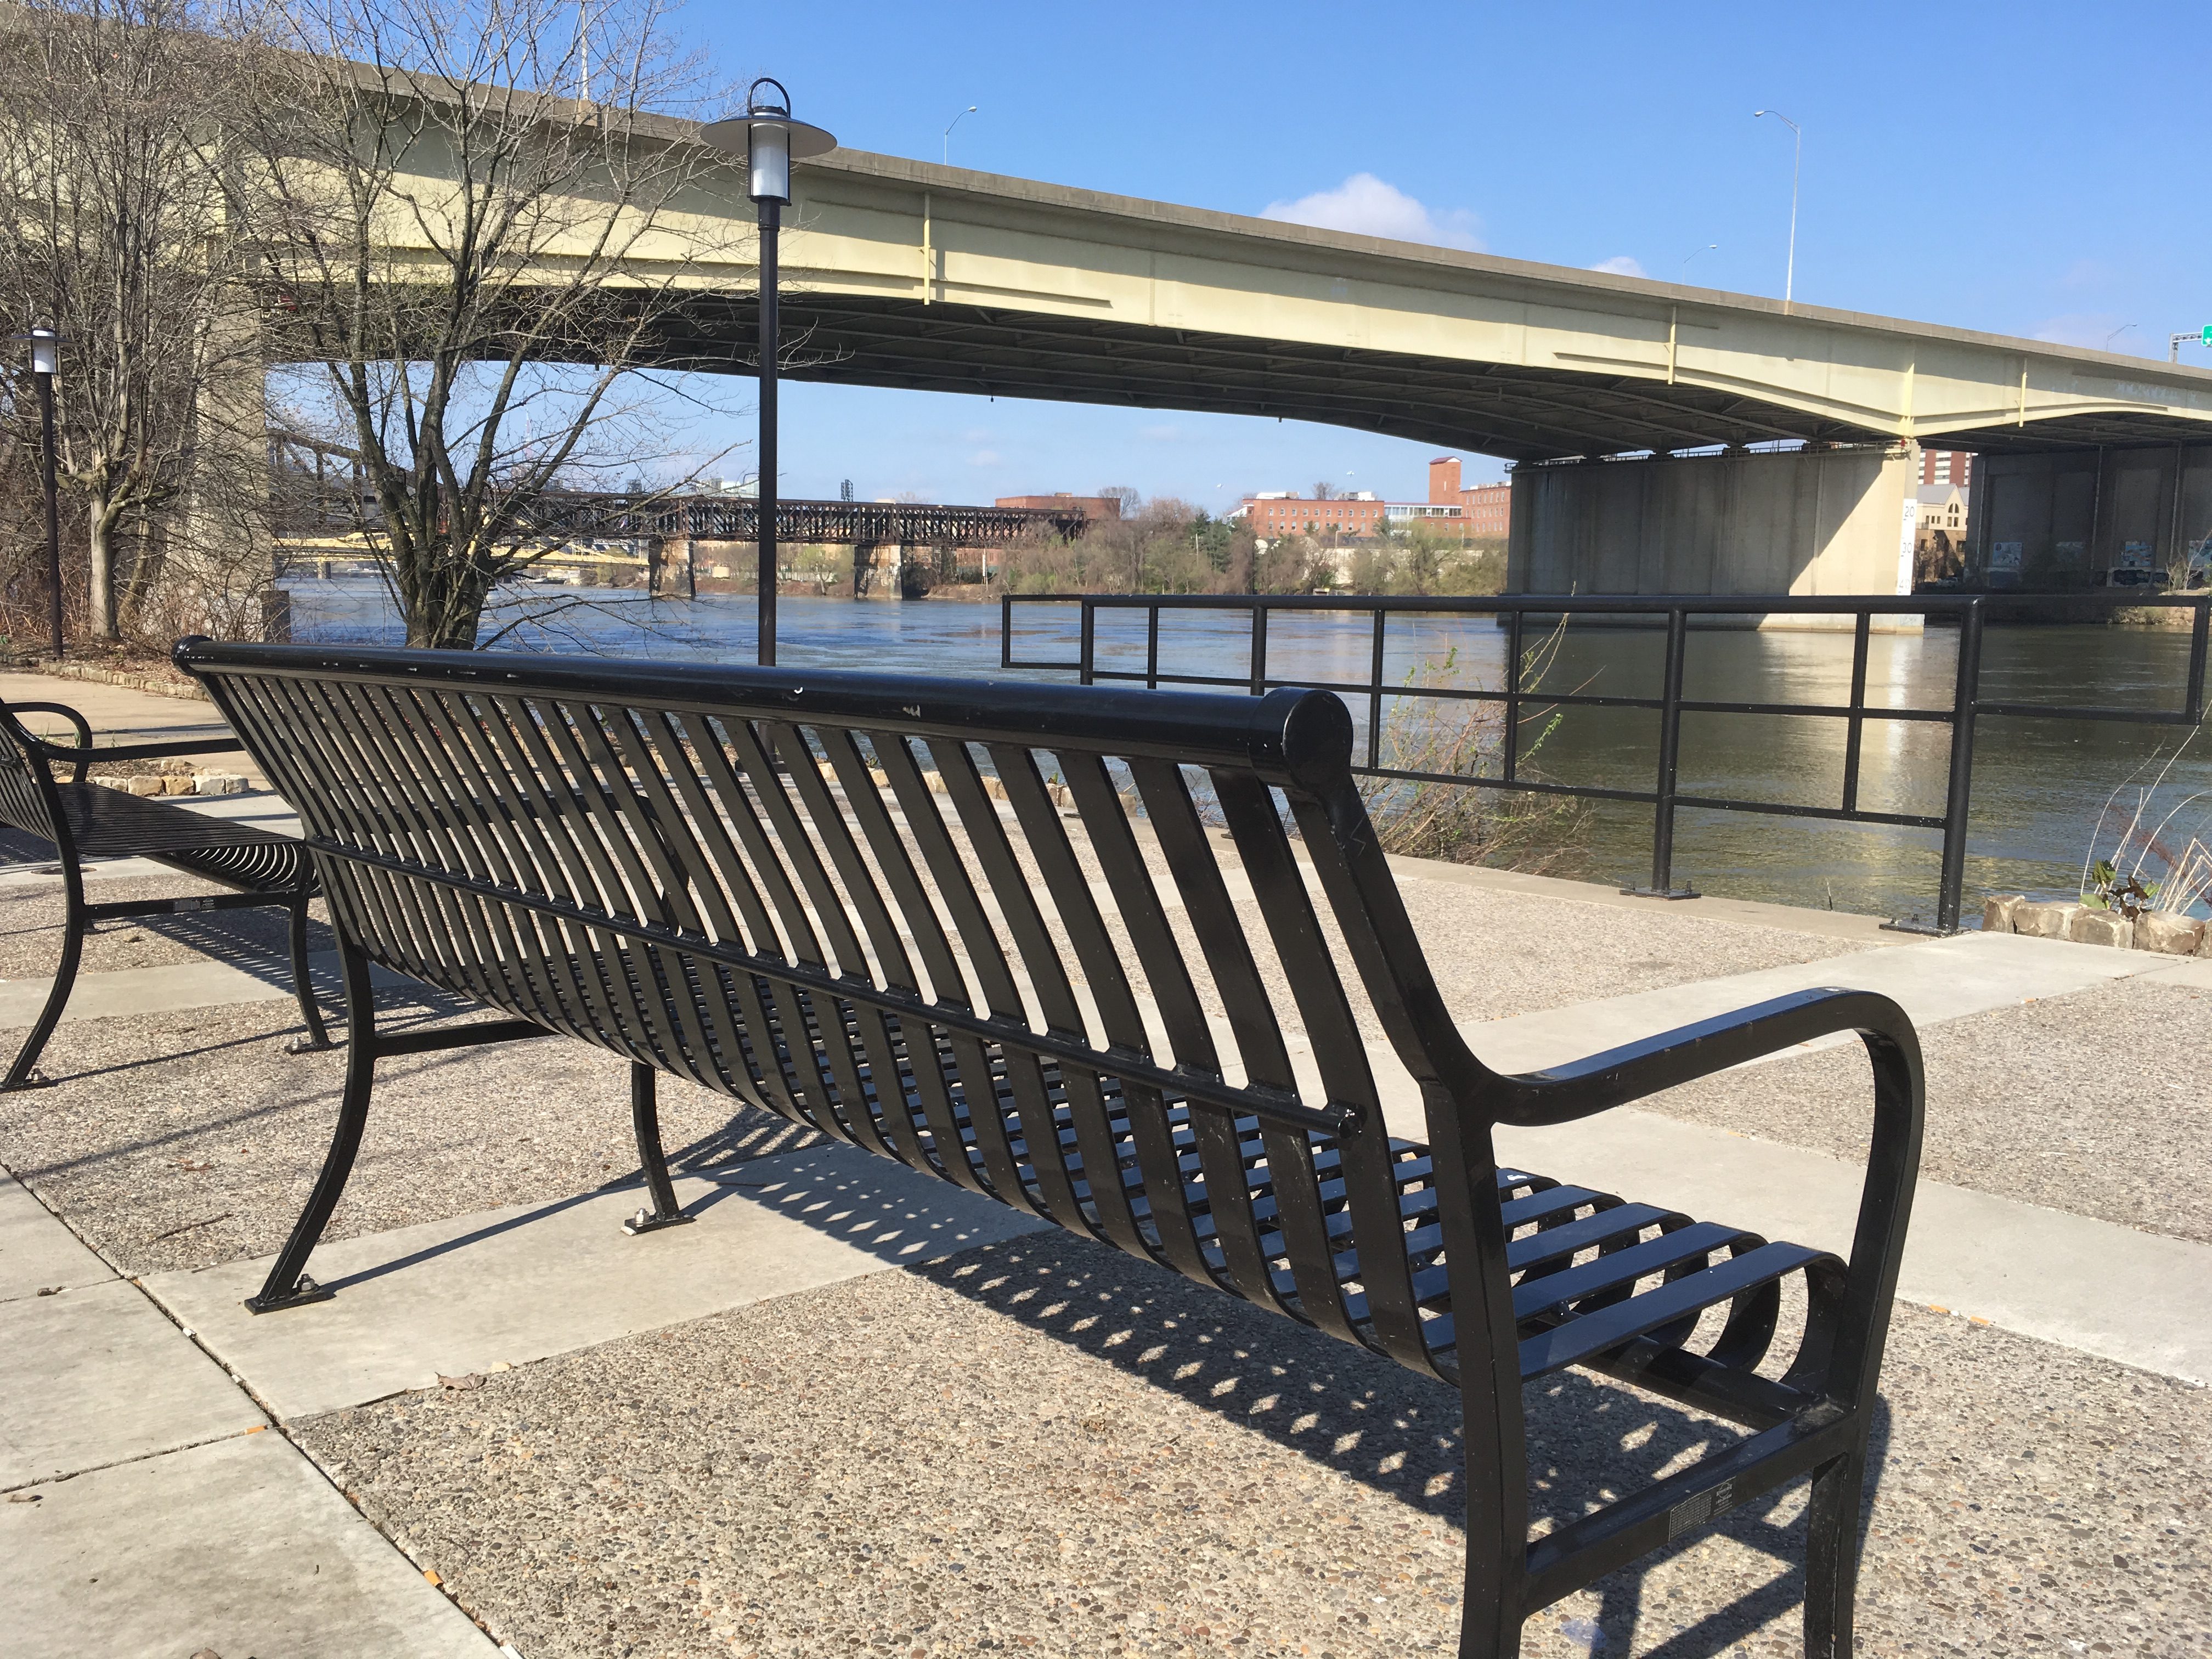 Refreshed seating options with river views along the Three Rivers Heritage Trail near 15th Street.